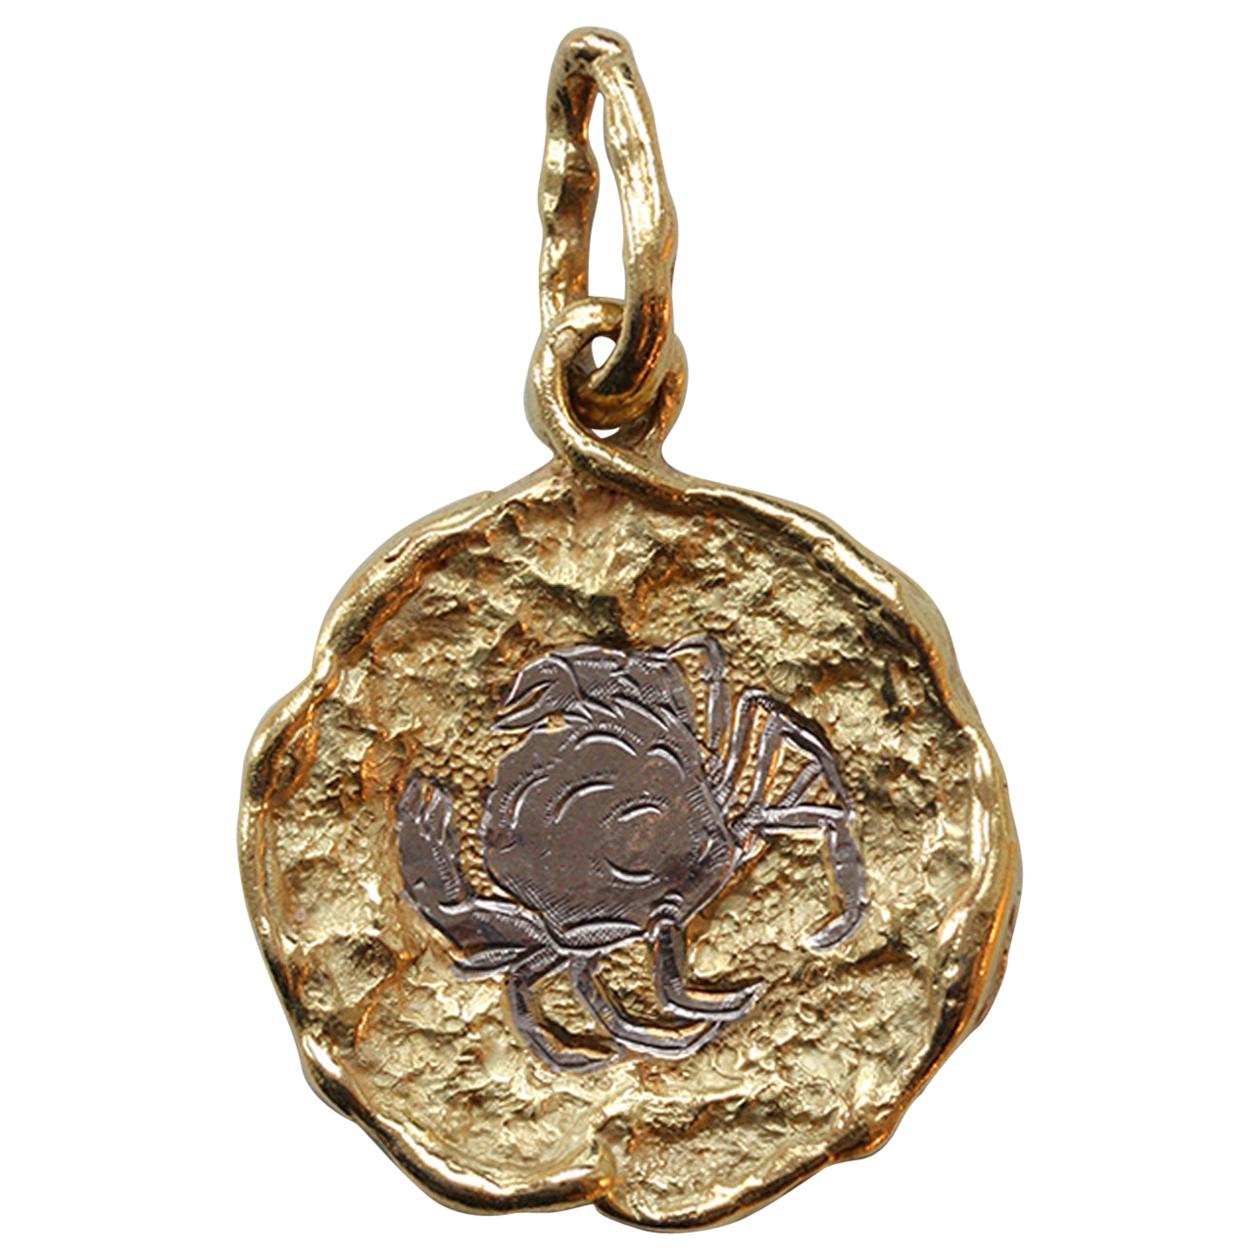 Chaumet 18 Carat White and Yellow Gold Cancer Zodiac Pendant